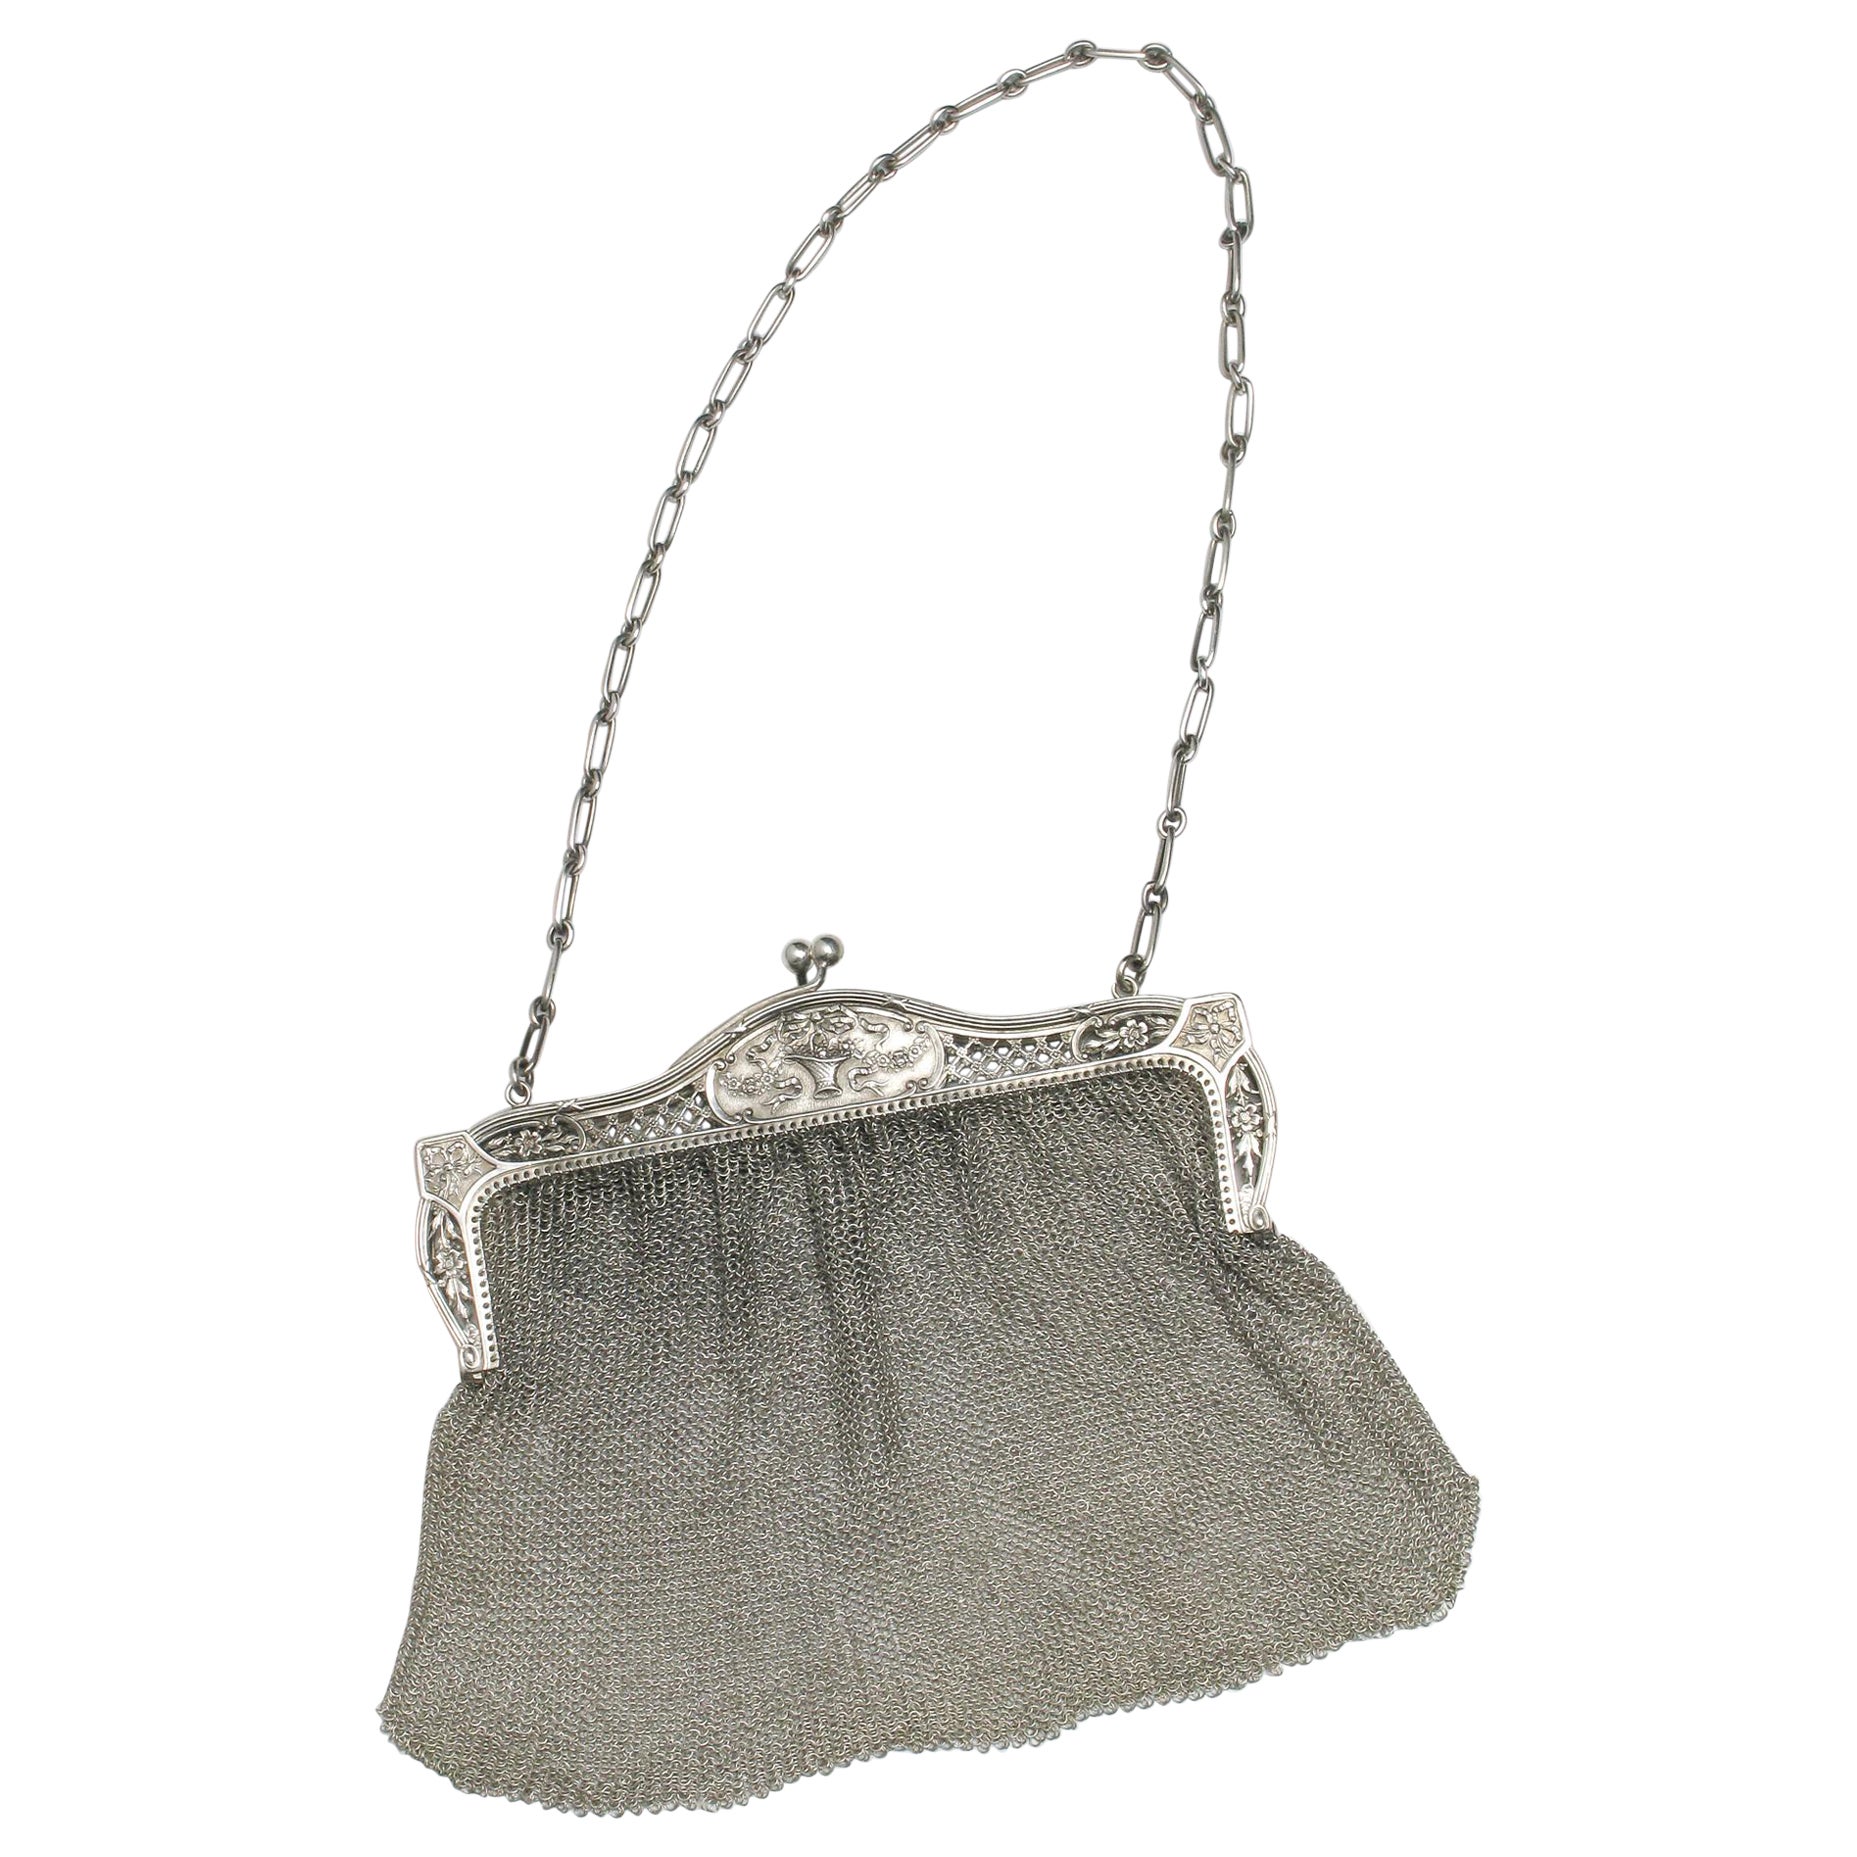 Evening Little Bag in Silver Mesh "Minaudière" to be Admired For Sale